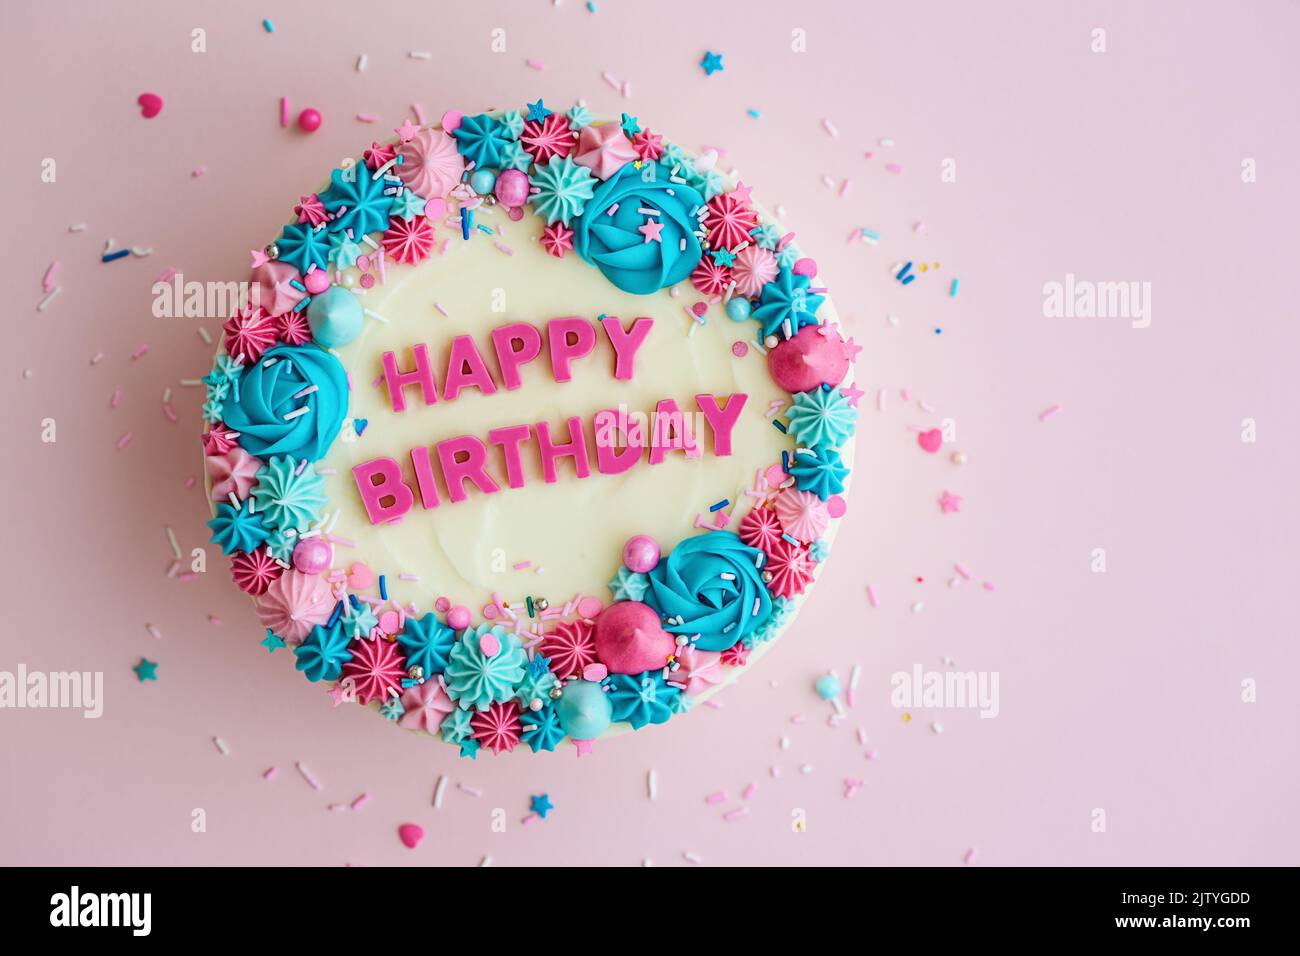 Birthday cake with colorful happy birthday greeting and sprinkles on a pink background, overhead view Stock Photo